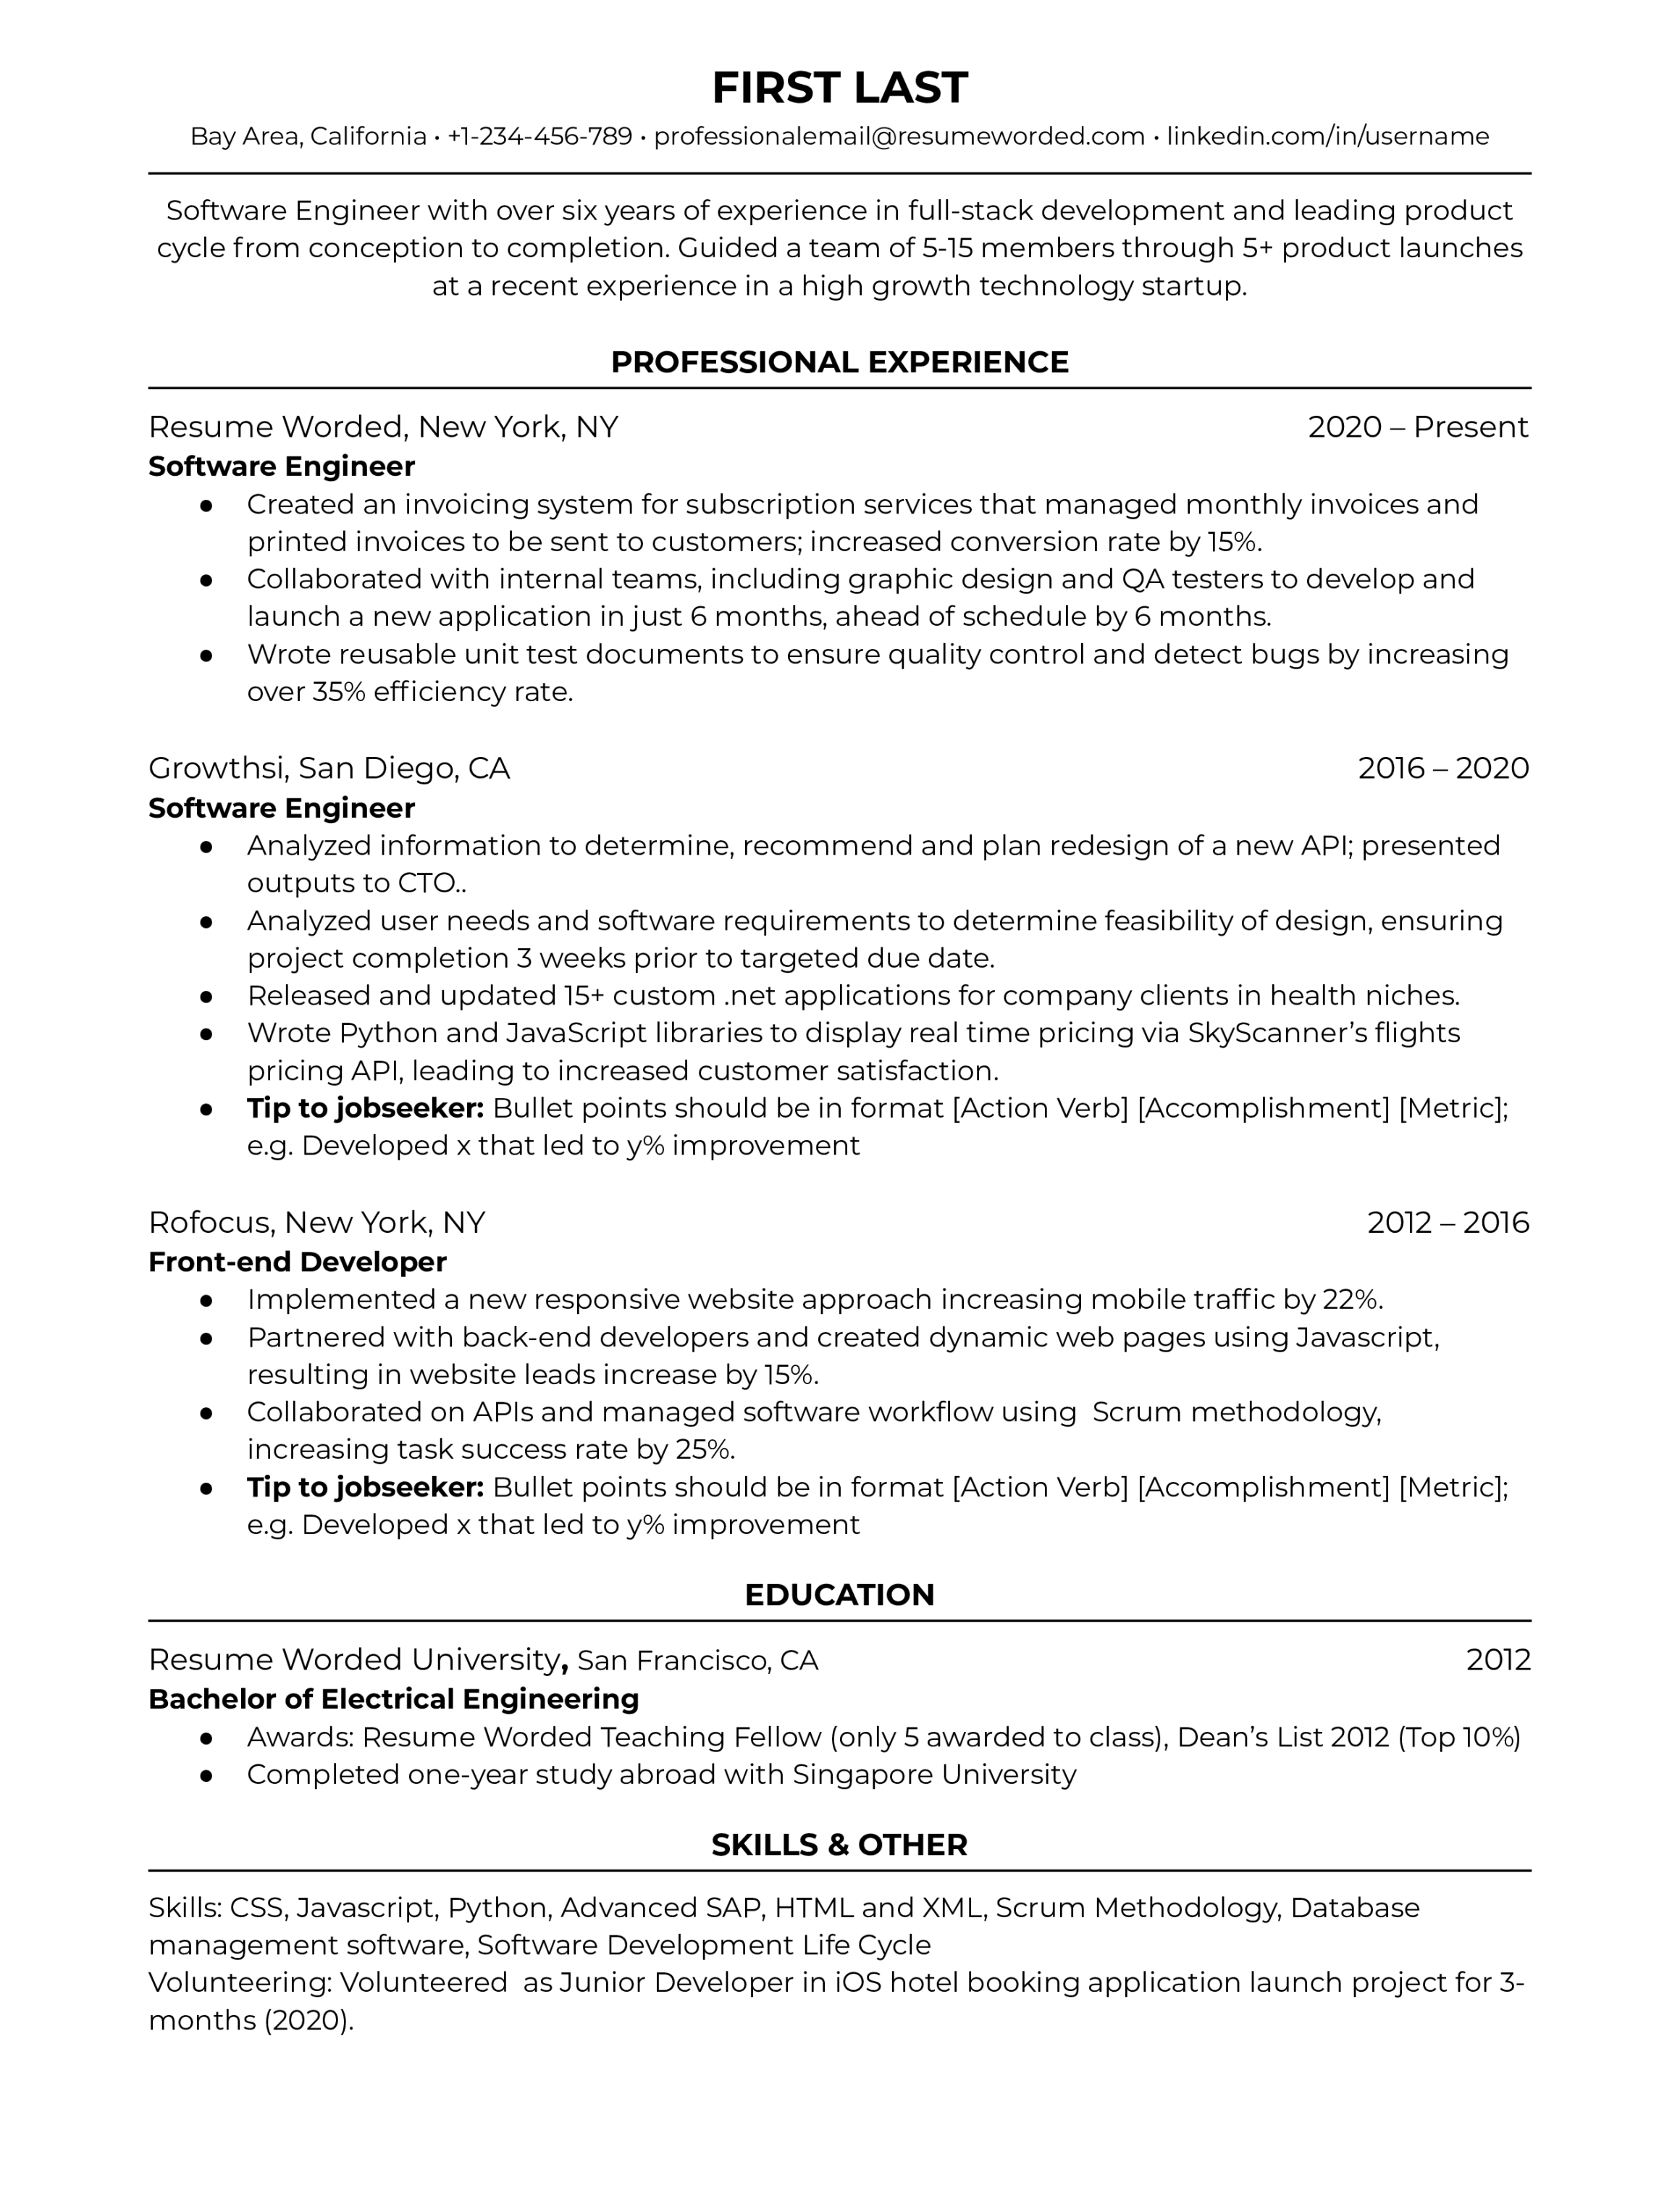 + Engineering Resume Examples for   Resume Worded